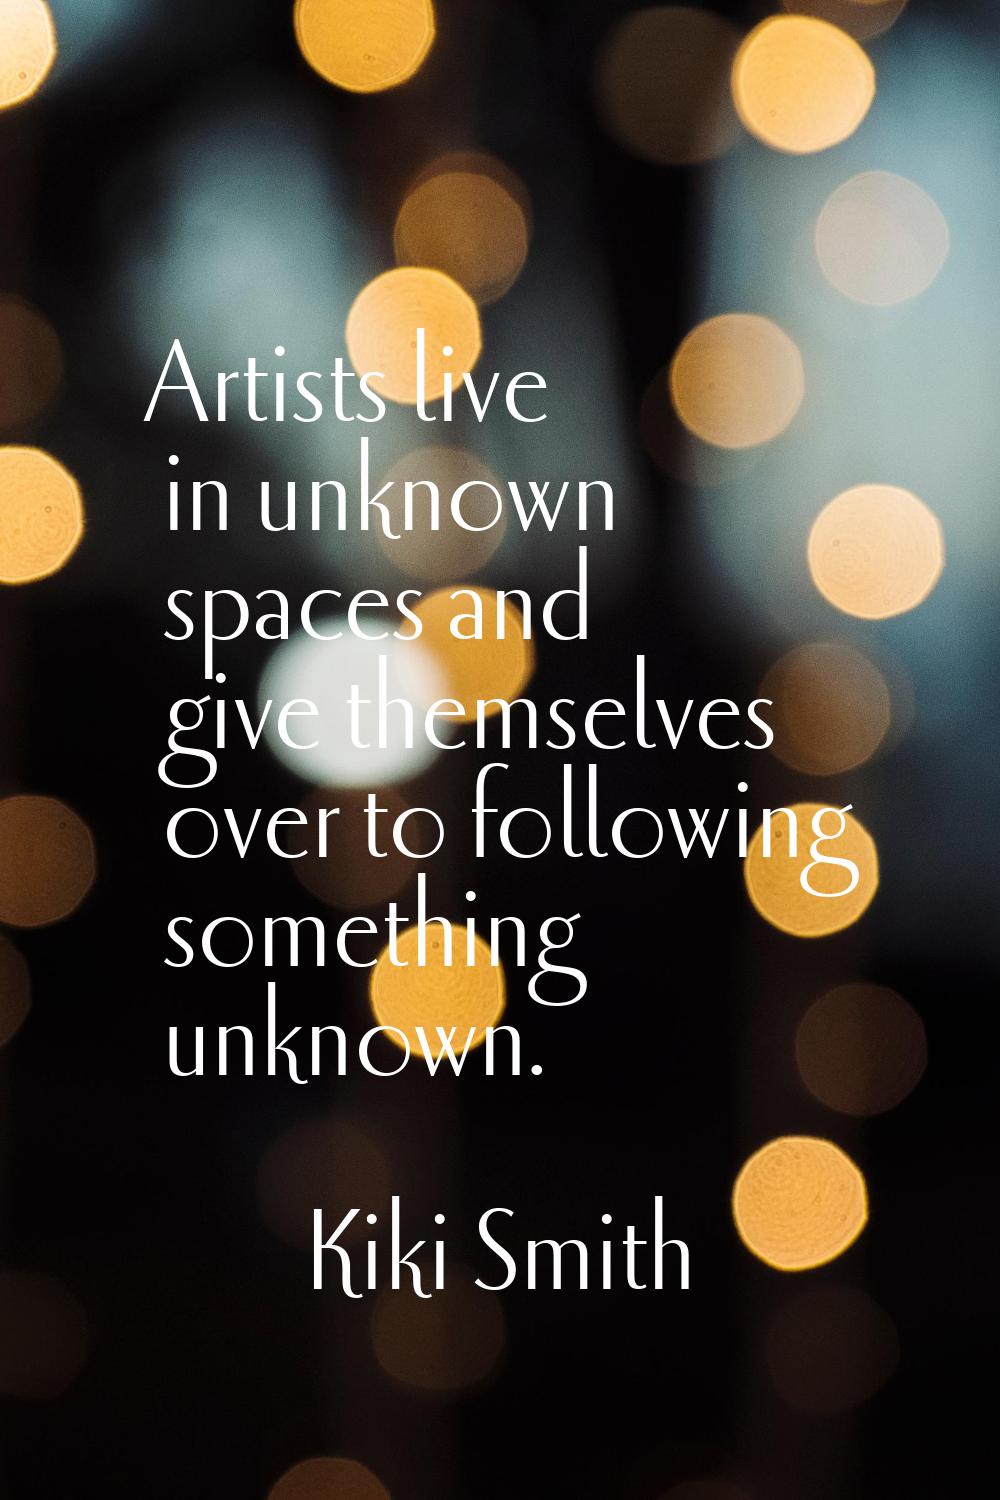 Artists live in unknown spaces and give themselves over to following something unknown.